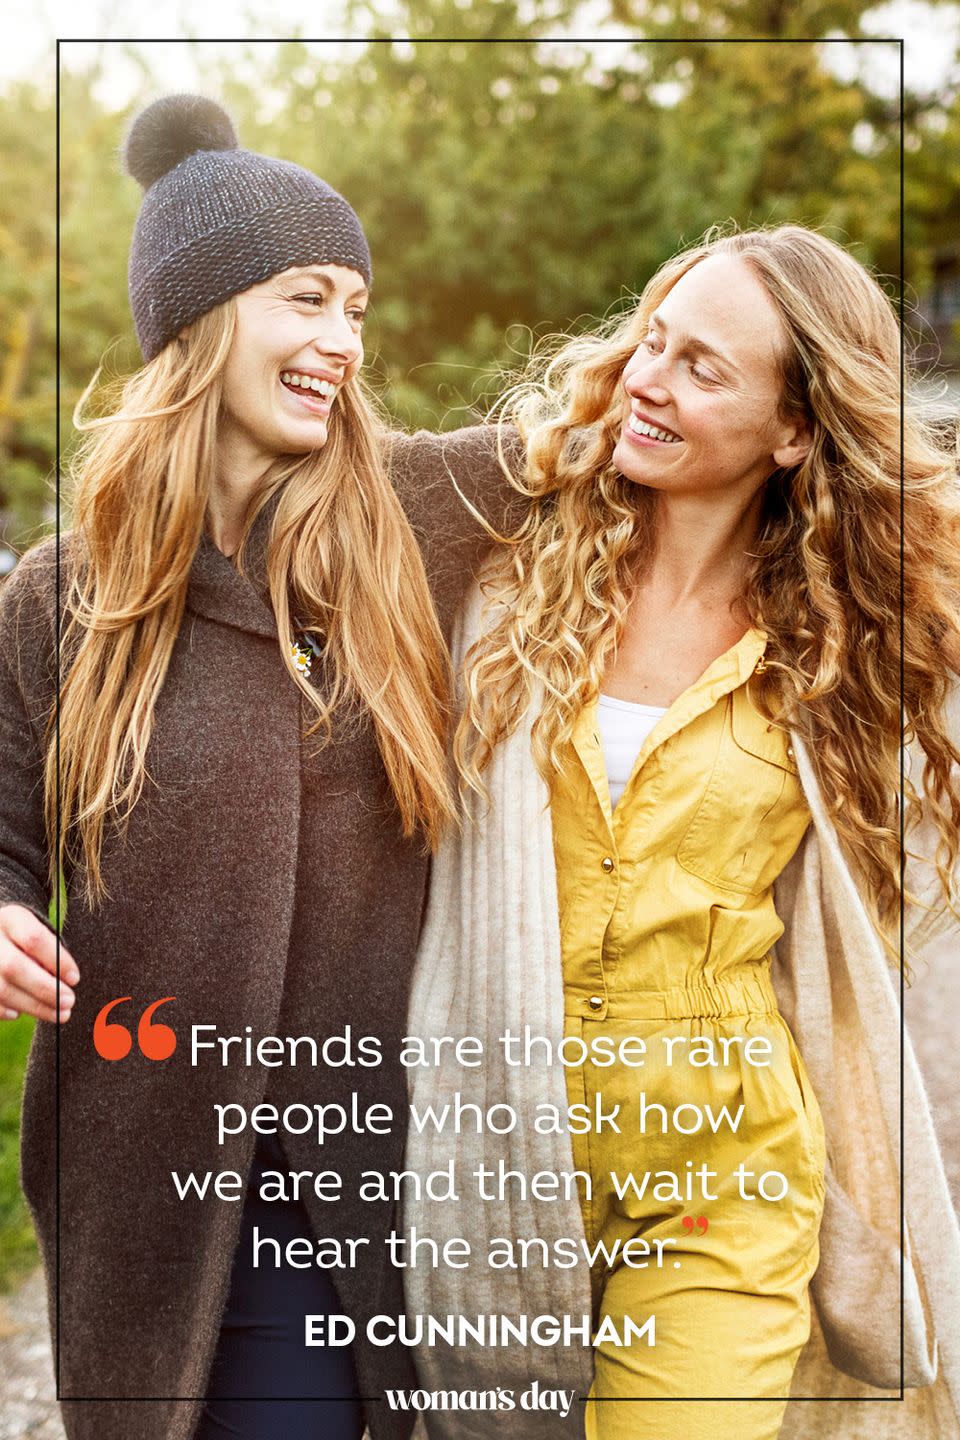 <p>"Friends are those rare people who ask how we are and then wait to hear the answer." </p>